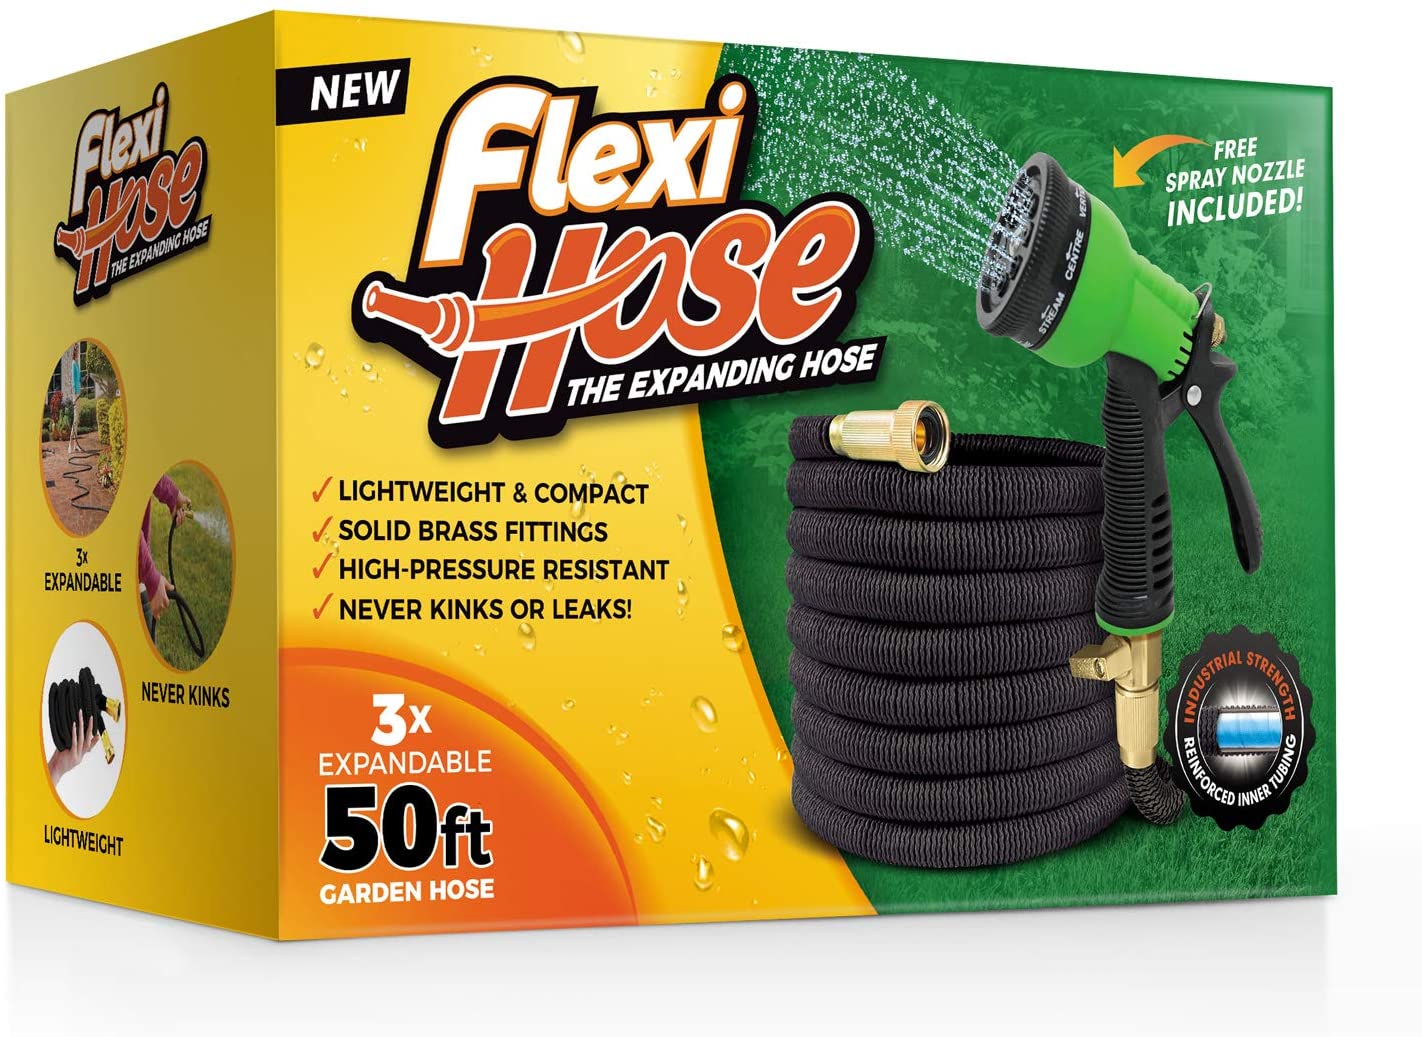 Flexi Hose with 8 Function Nozzle, Lightweight Expandable Garden Hose, No-Kink Flexibility, 3/4 Inch Solid Brass Fittings - image 4 of 8